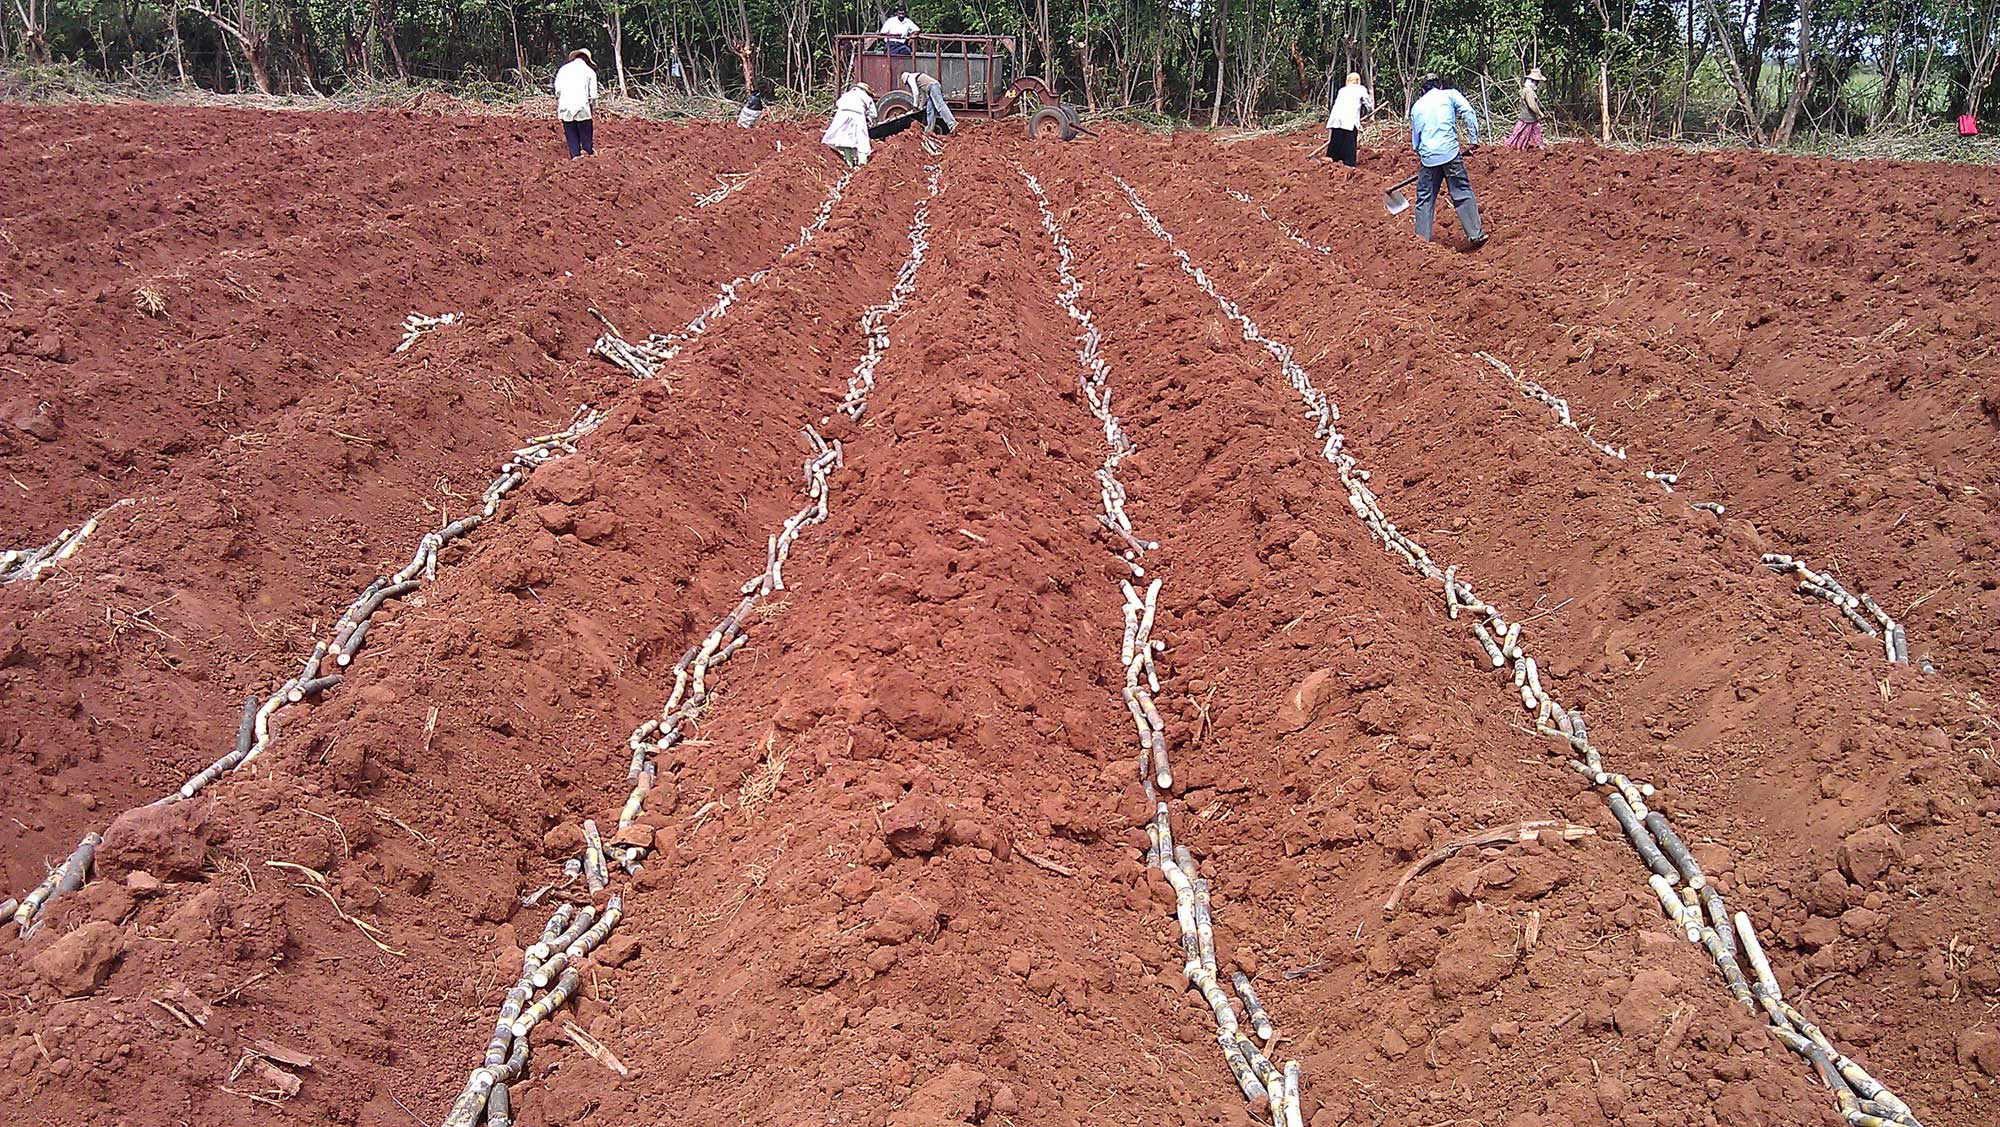 Photograph of people planting pieces of sugarcane stalk in furrows by hand. The photo shows a plowed field with parallel furrows in it. Pieces of sugarcane stem have been laid in a line in each furrow. In the Background, people can be seen working in the field.